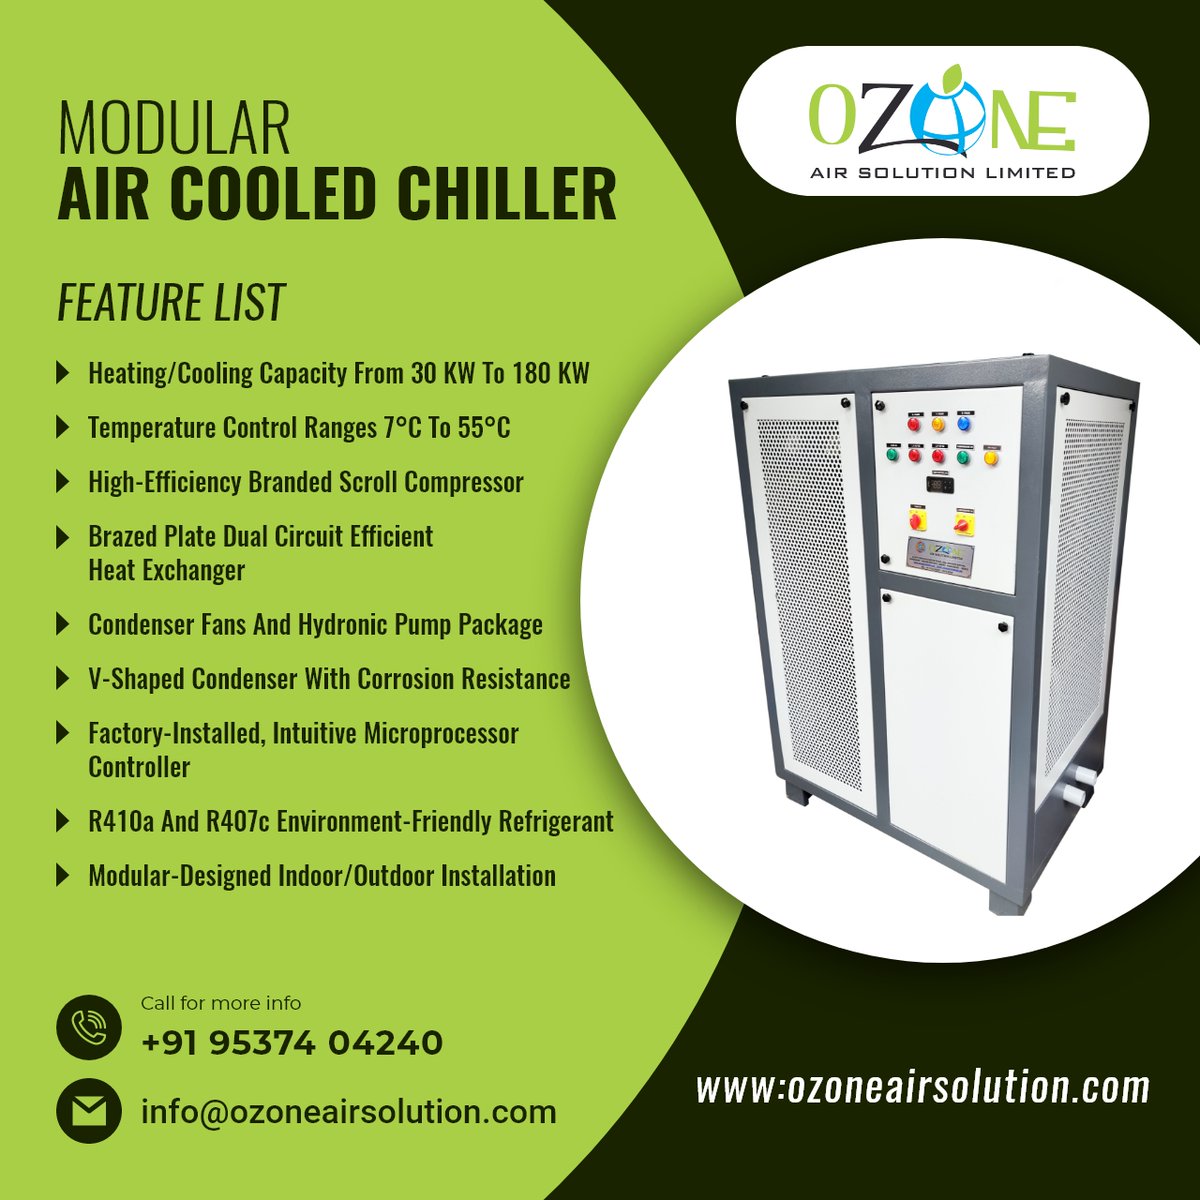 Modular Air-Cooled #Chiller is highly energy-efficient and environment friendly. @ozoneair3 
#AirCooledChiller #ModularAirCooledChiller #ModularAirCooledChillerManufactures #OzoneAirSolution #ModularAirCooledChillerSupplier #Ozone #IndustrialGlycolChillerManufactures 
#Ozone